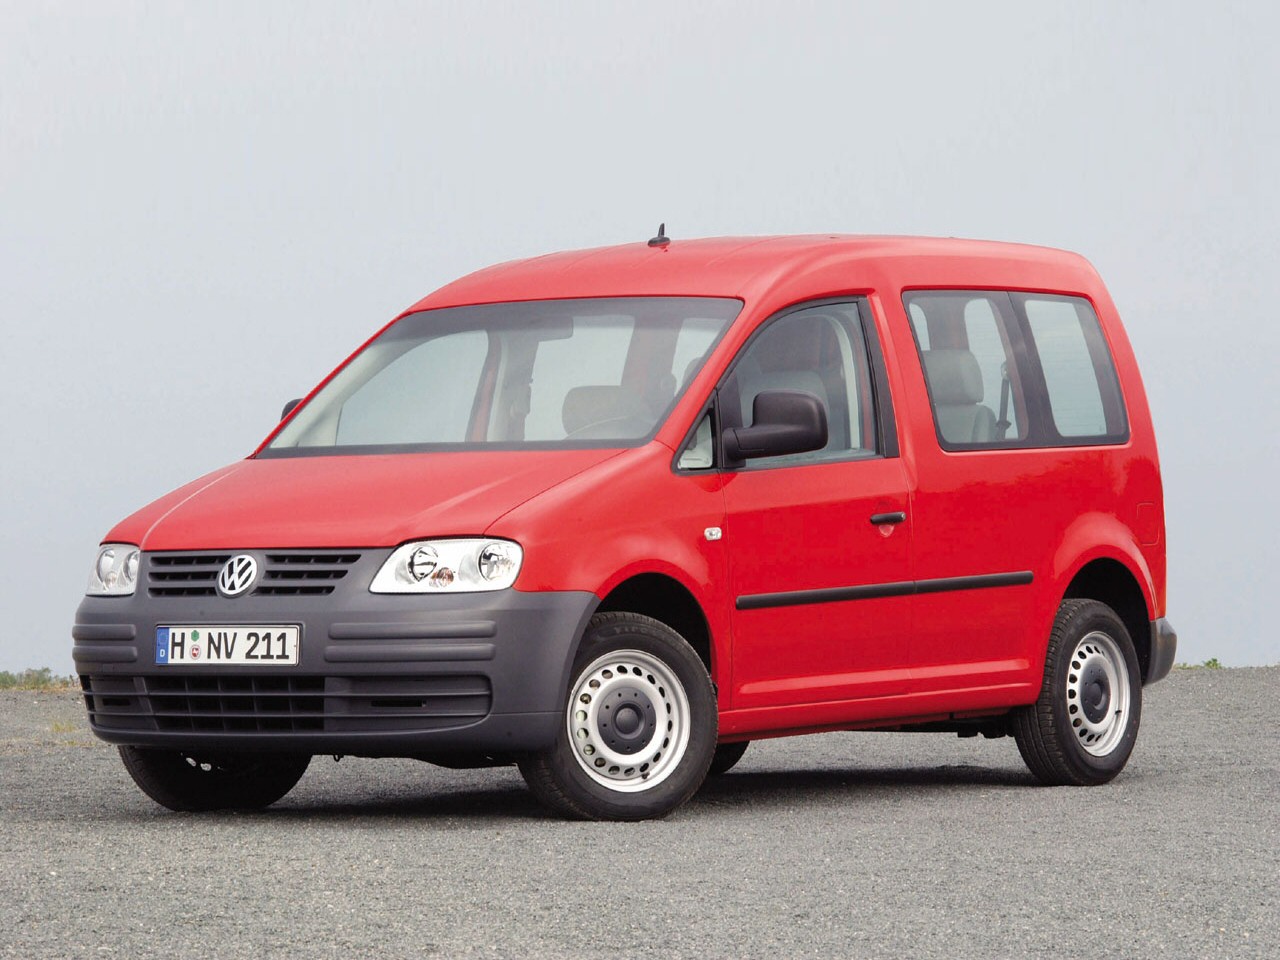 Car in pictures car photo gallery » Volkswagen Caddy